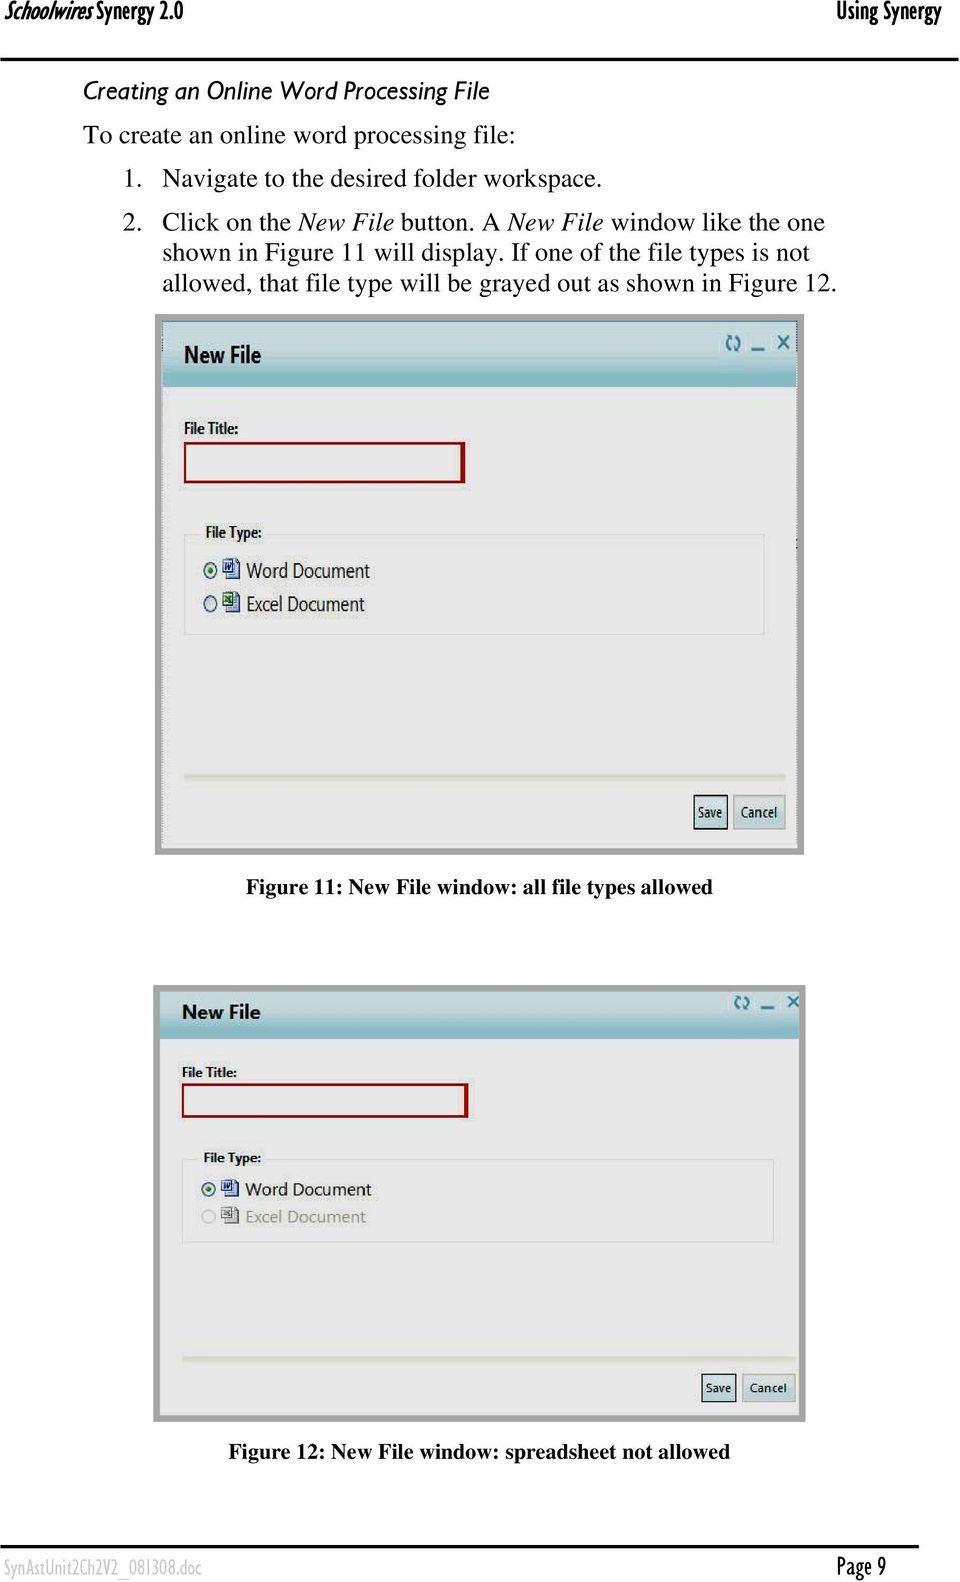 A New File window like the one shown in Figure 11 will display.